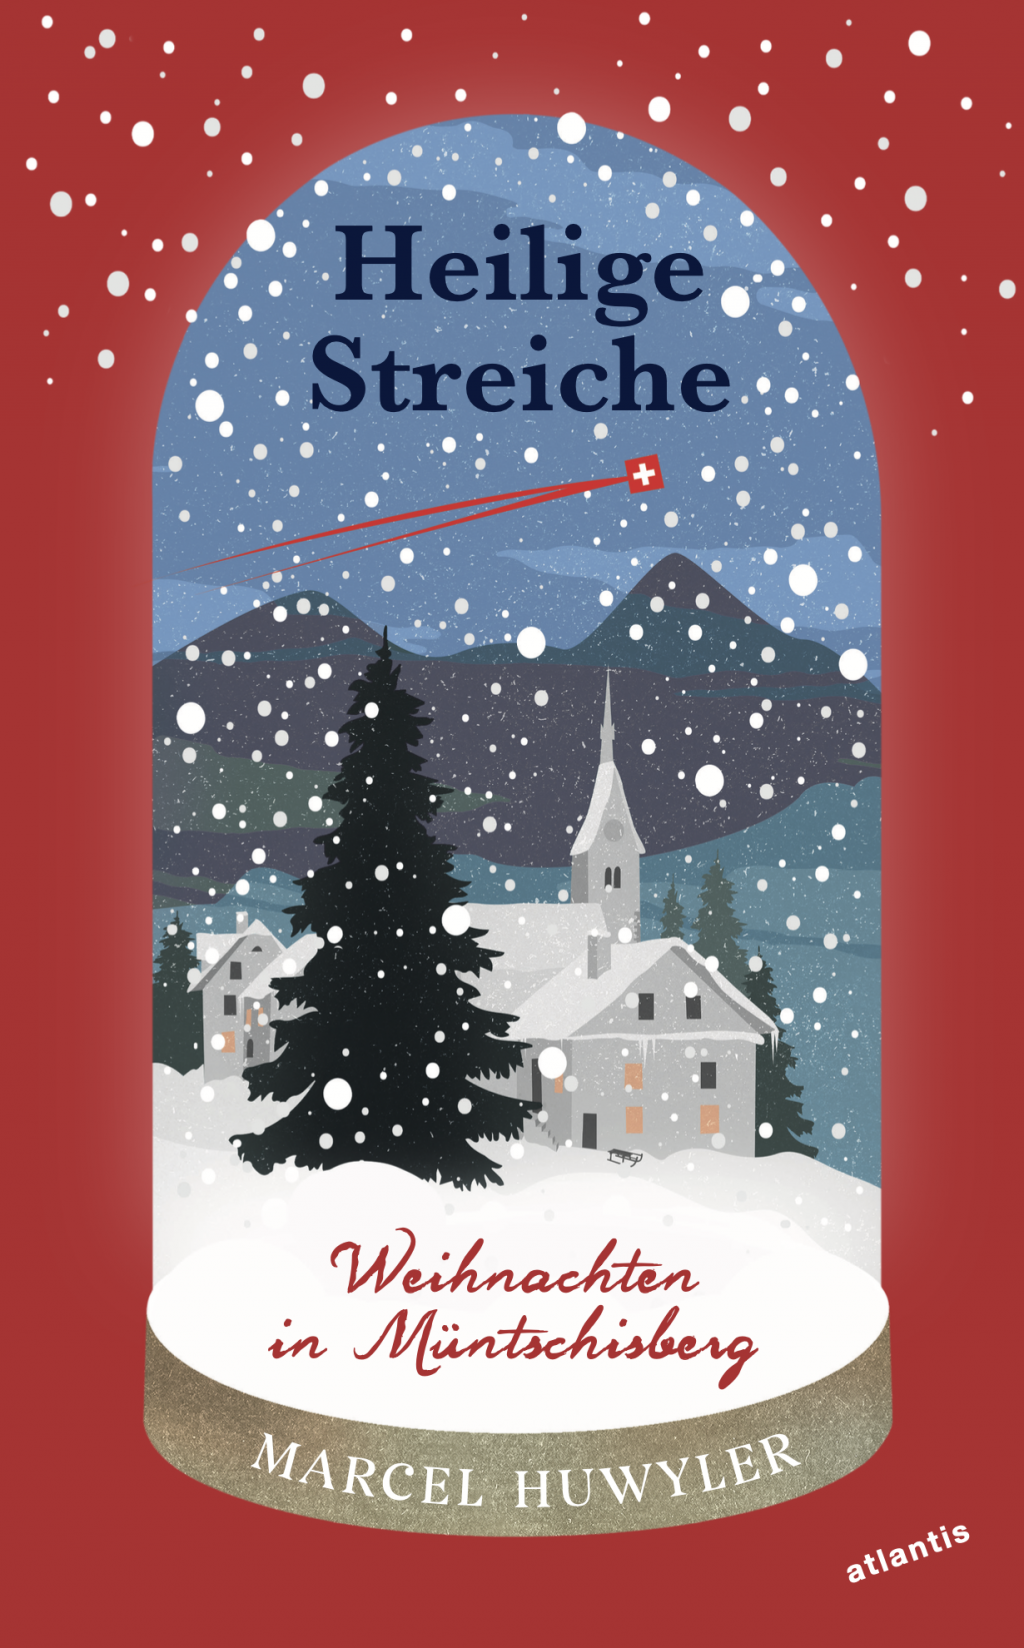 image-11900876-Cover_Heilige_Streiche_in_2D.jpeg_(1)-c51ce.w640.png